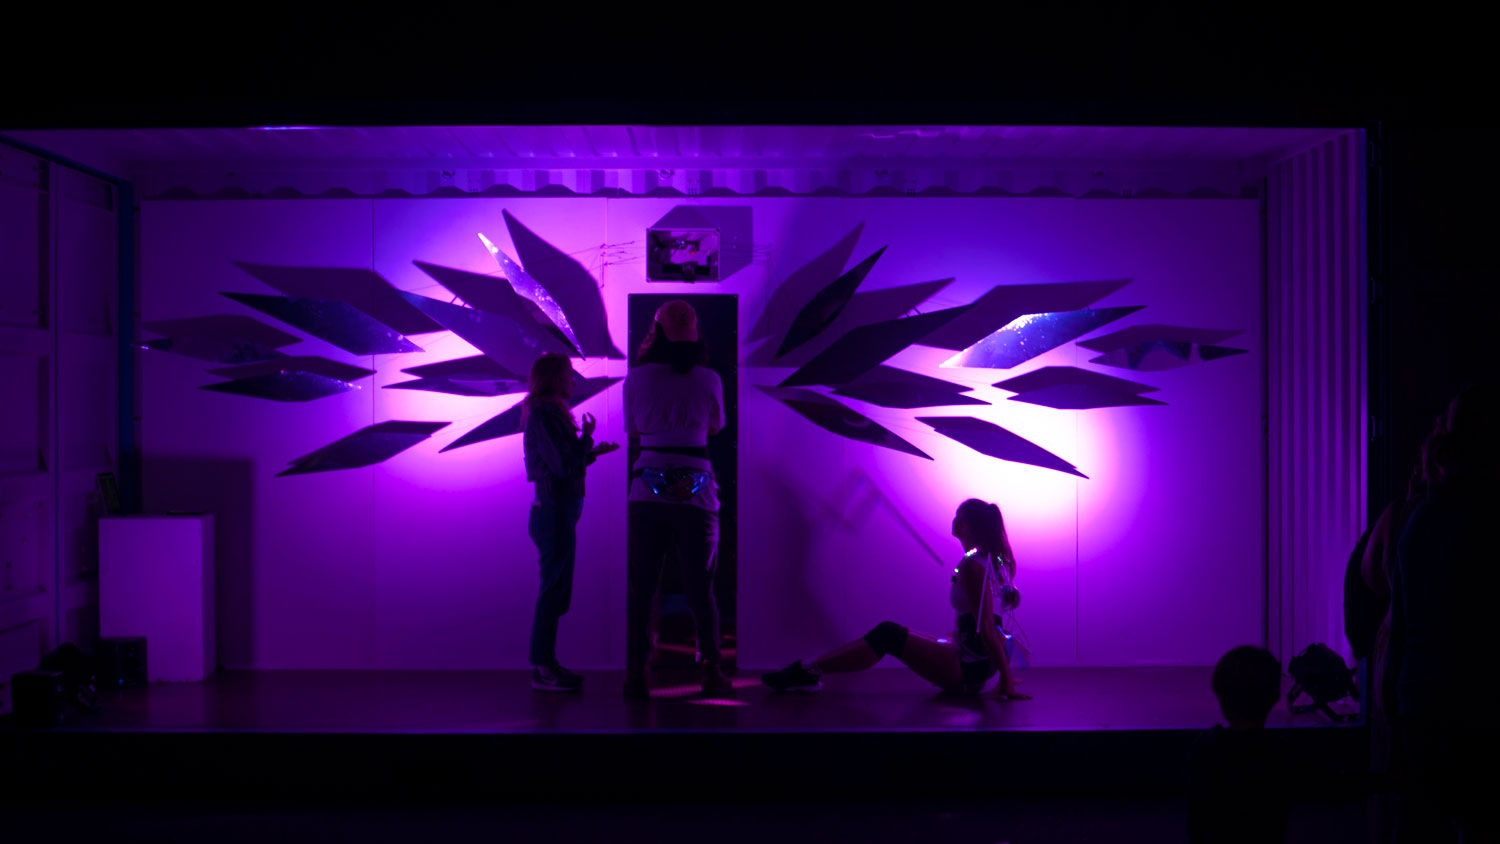 Two people on stage silohetted against a purple lit background with geometric leafy like shapes. Another person stance with back to the view in the middle of the scene, but hidden by a shadow. 